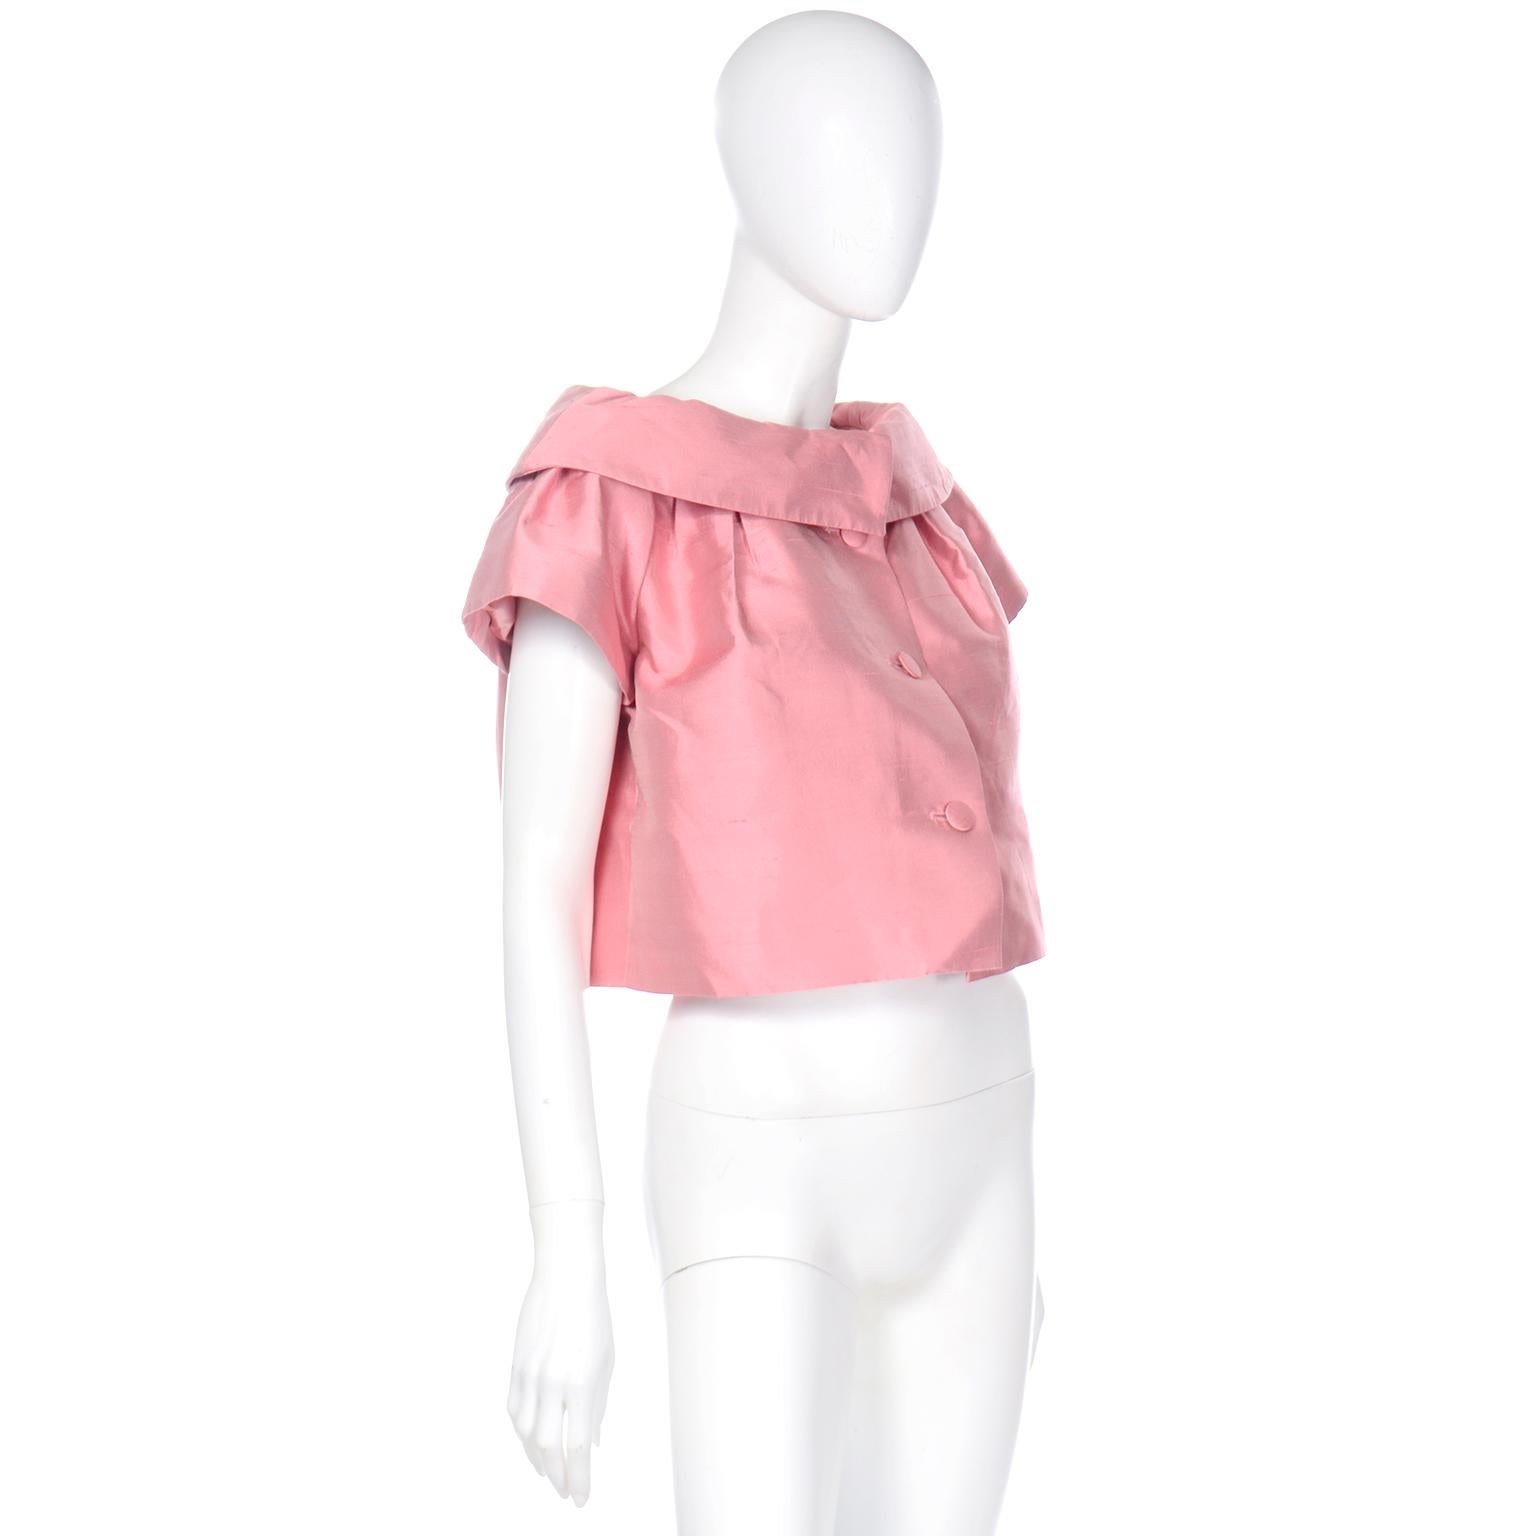 John Galliano for Christian Dior 1960s Inspired Pink 2008 Vintage Jacket Top 4